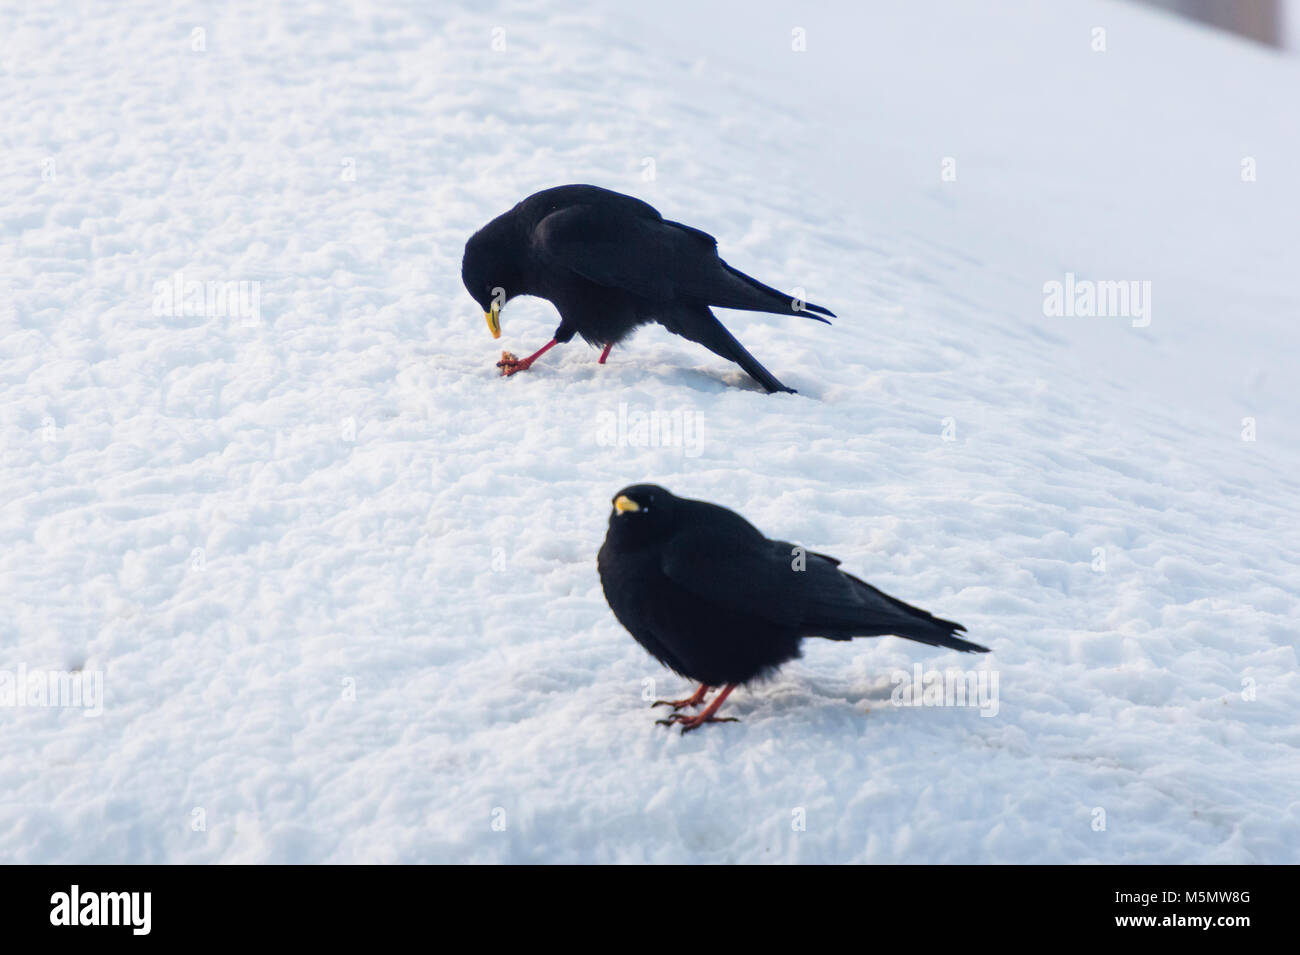 An alpine chough (Pyrrhocorax graculus) is sitting in the snow during winter in Switzerland. Stock Photo